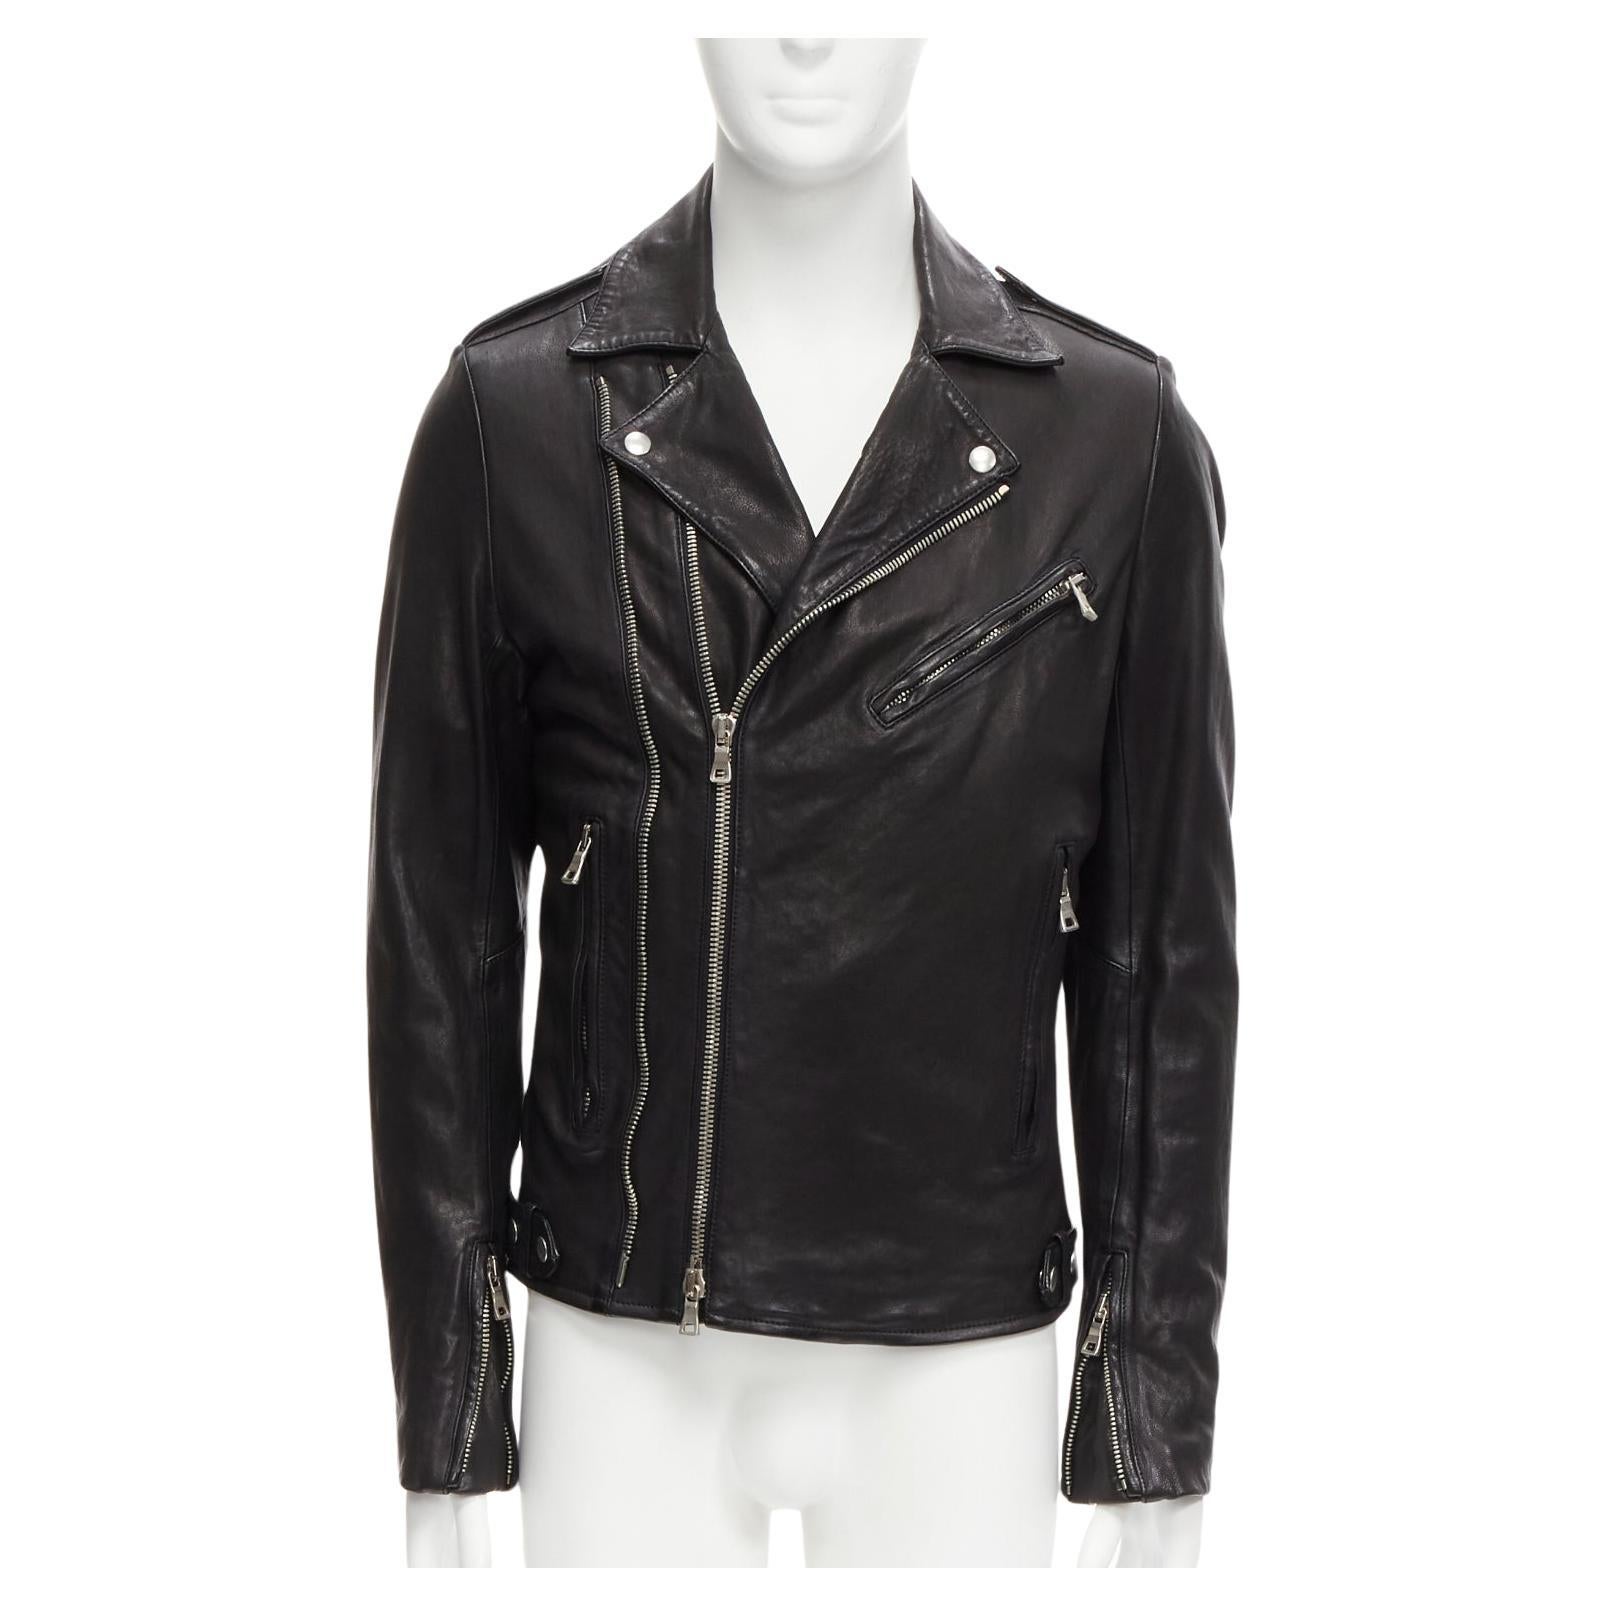 Gucci IT42 Nwt Black Leather Jacket, 2017 Collection